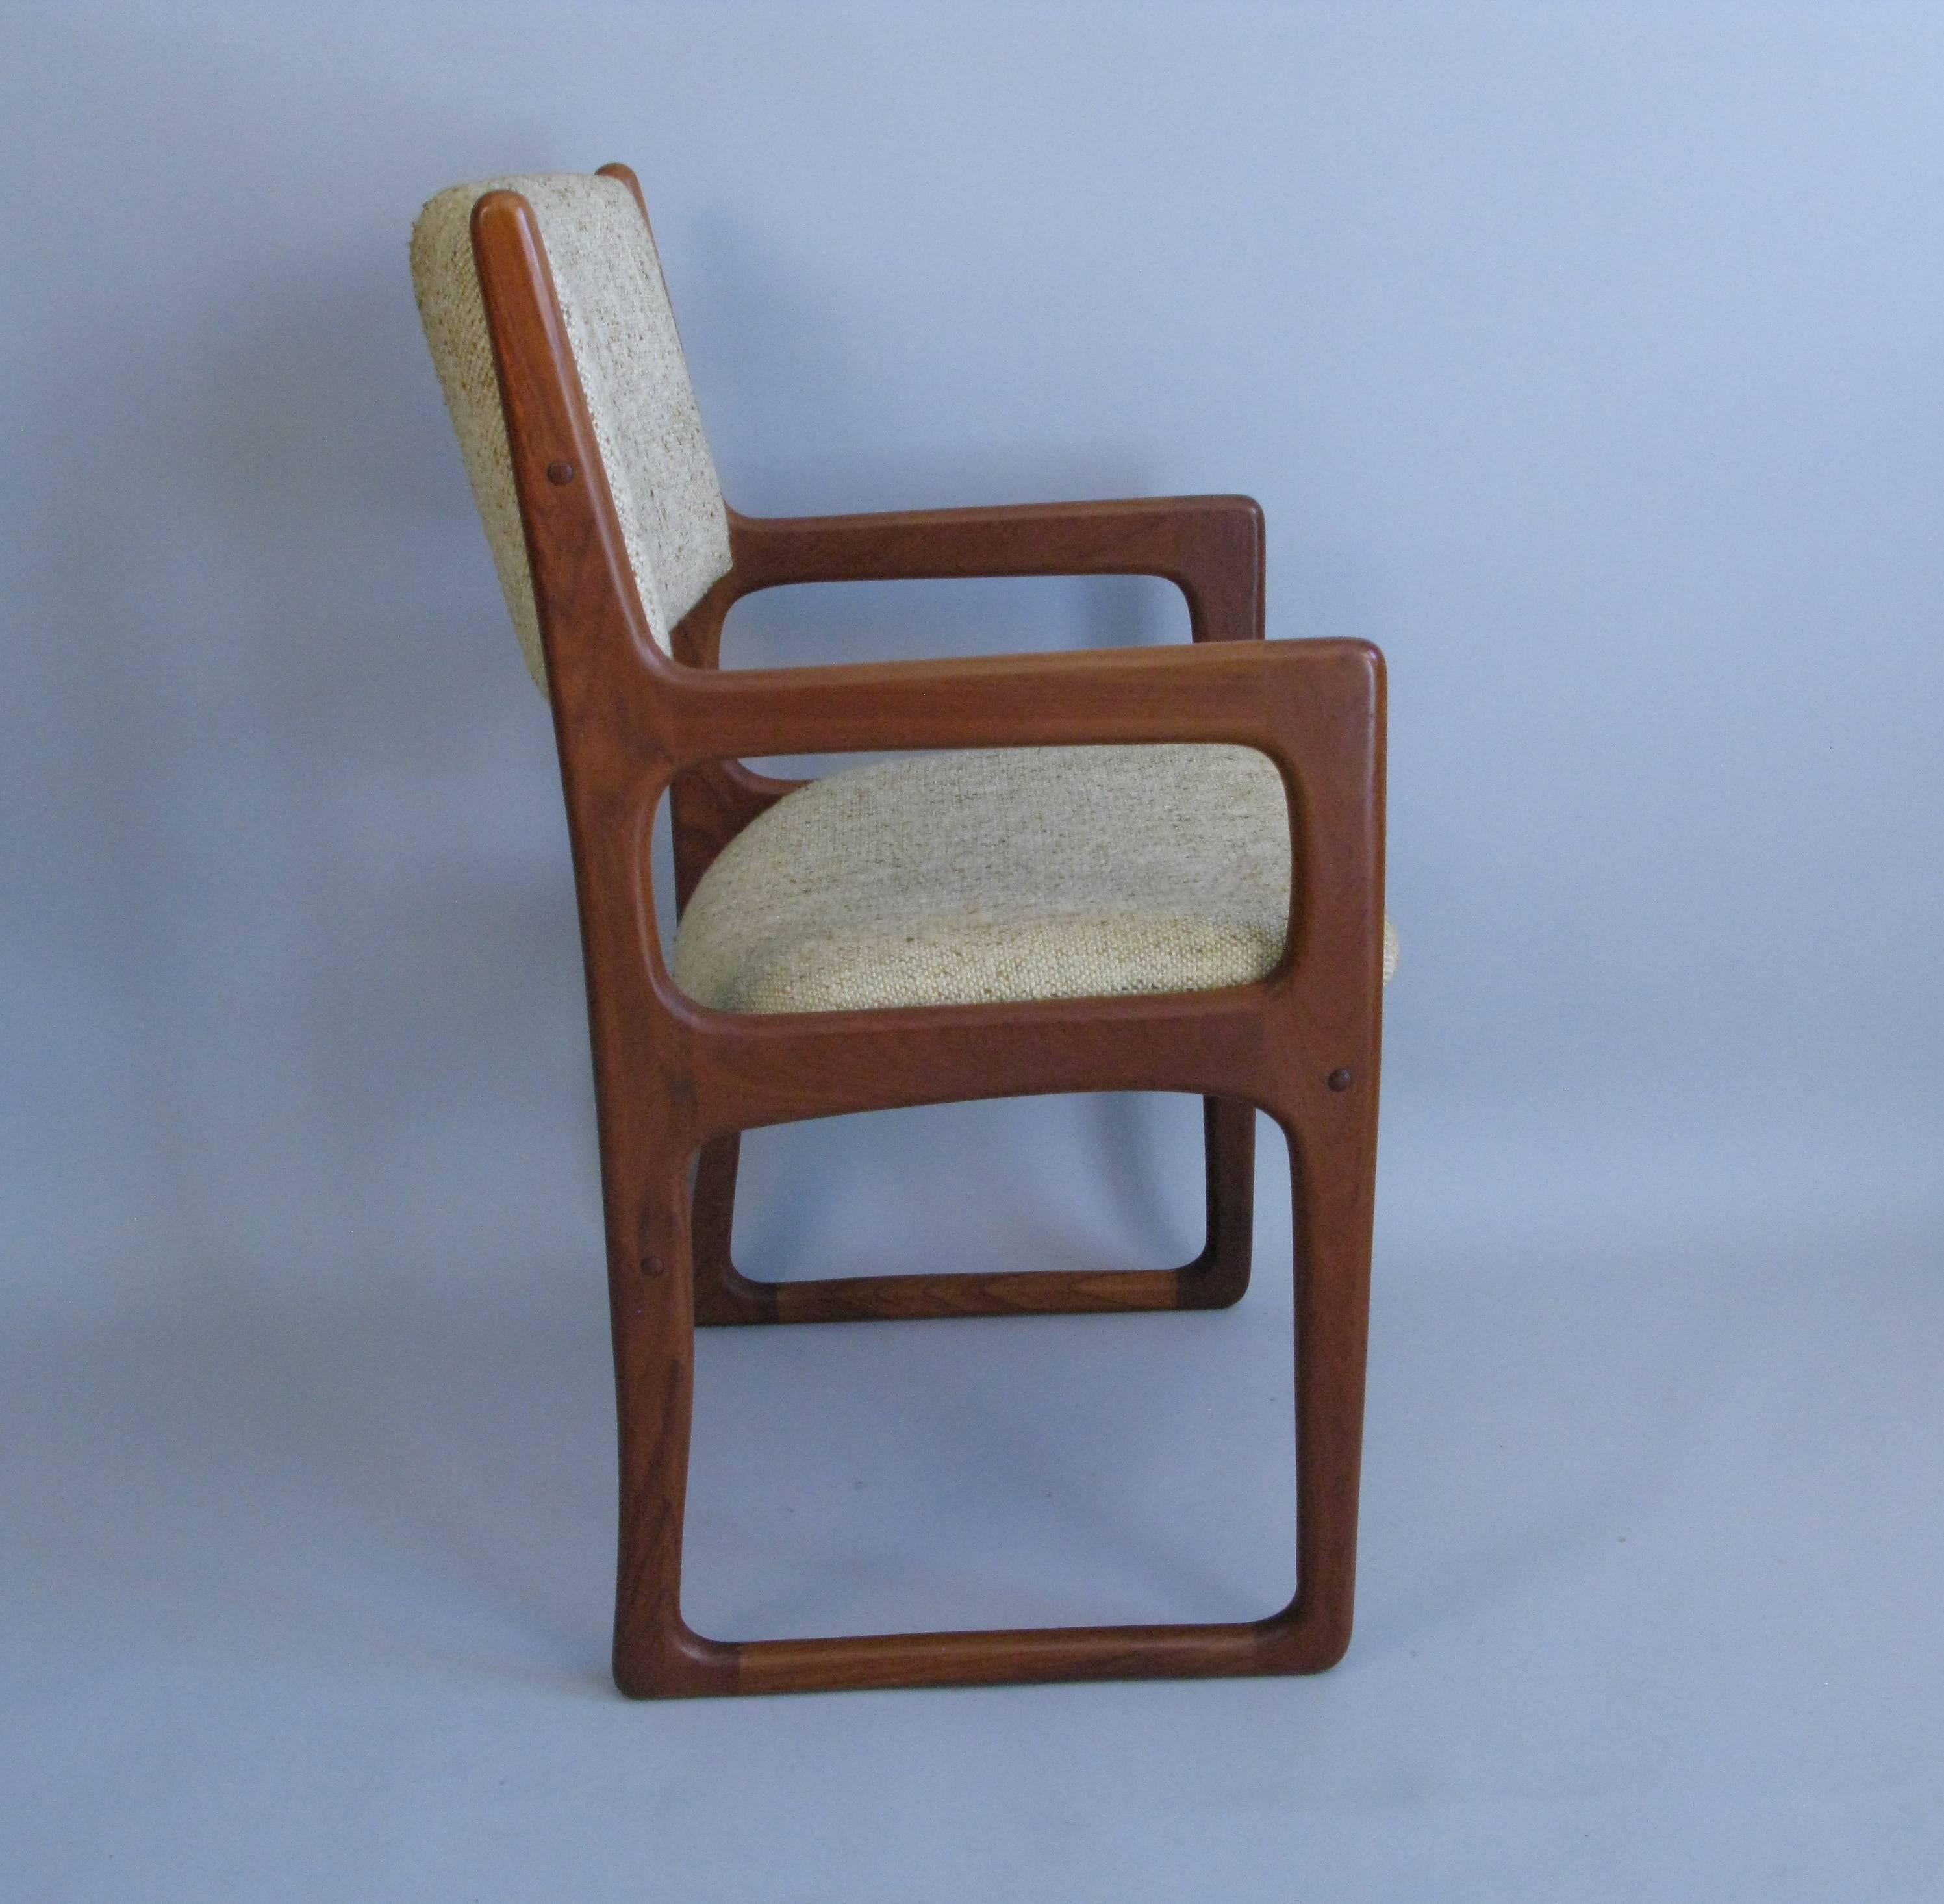 Thai Set of Six 1960s Danish Design Chairs by Benny Linden